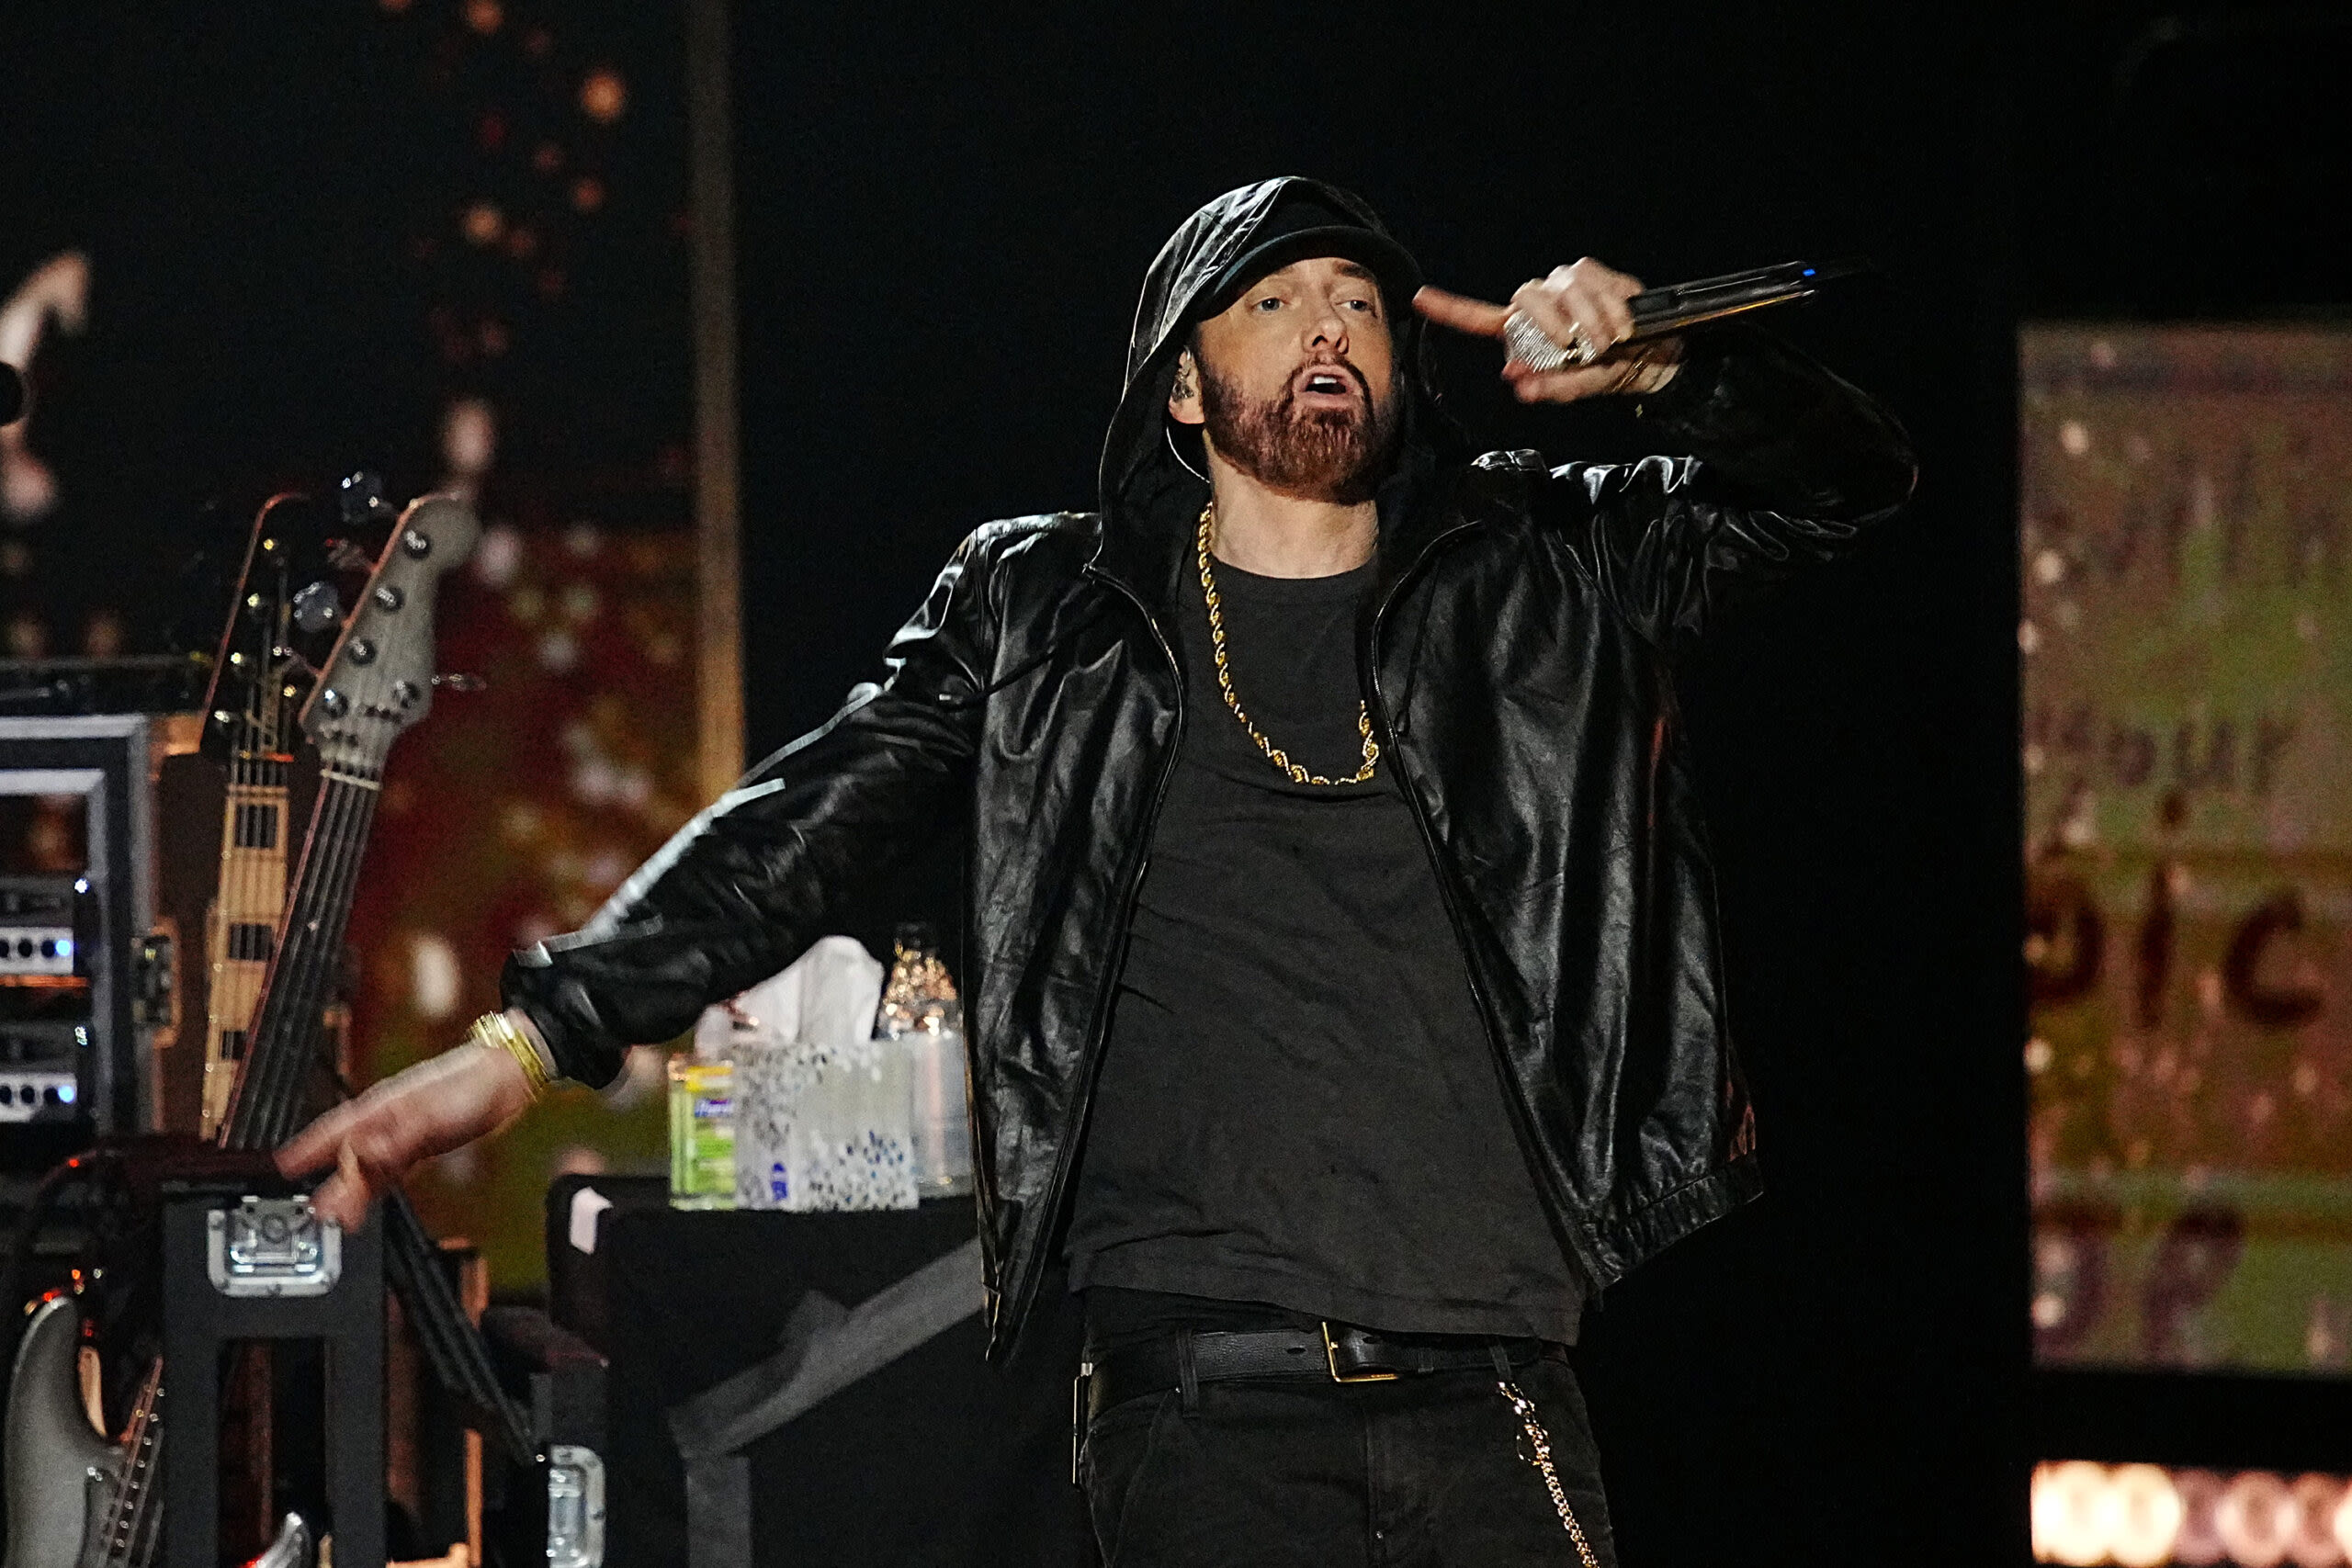 Eminem Reappears With New Single, ‘Houdini’